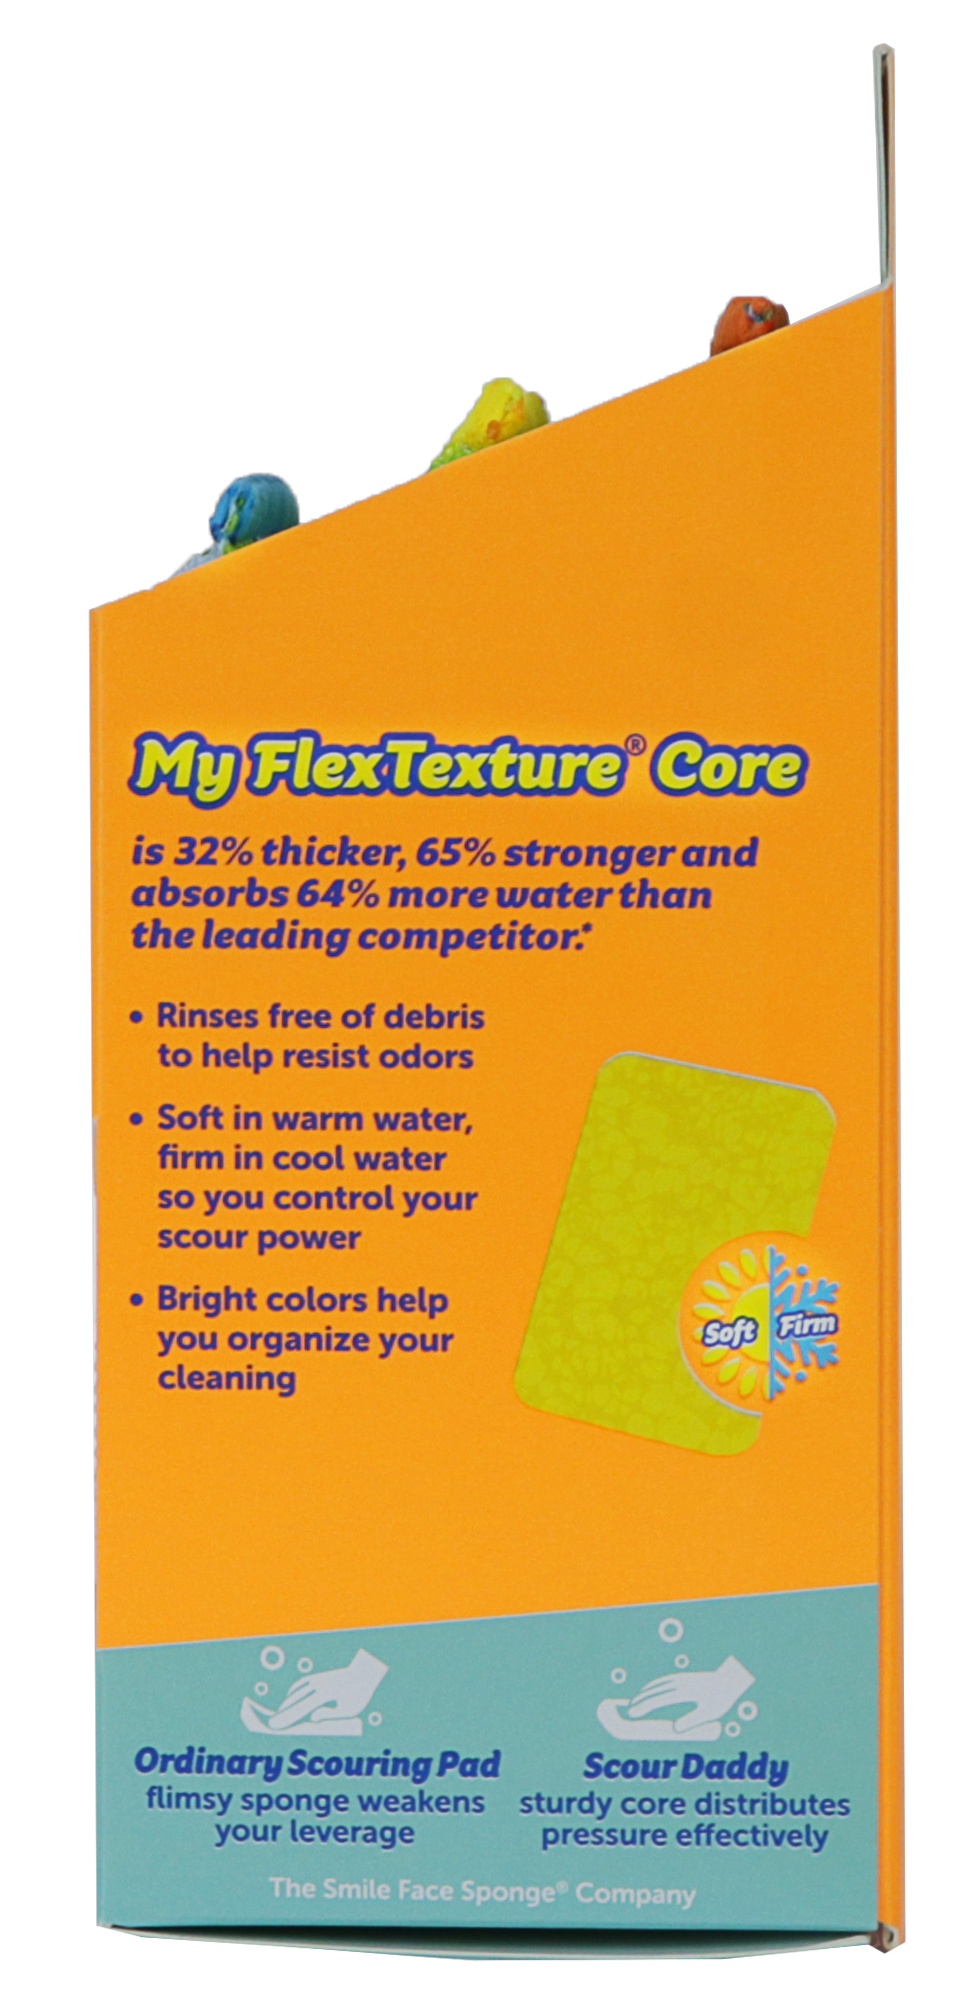 Scrub Daddy Scour Pads - Scour Daddy - Multi-Surface Scouring Pad,  Absorbent, Durable, FlexTexture Sponge, Soft in Warm Water, Firm in Cold,  Scratch Free, Odor Resistant, Easy to Clean, 3ct